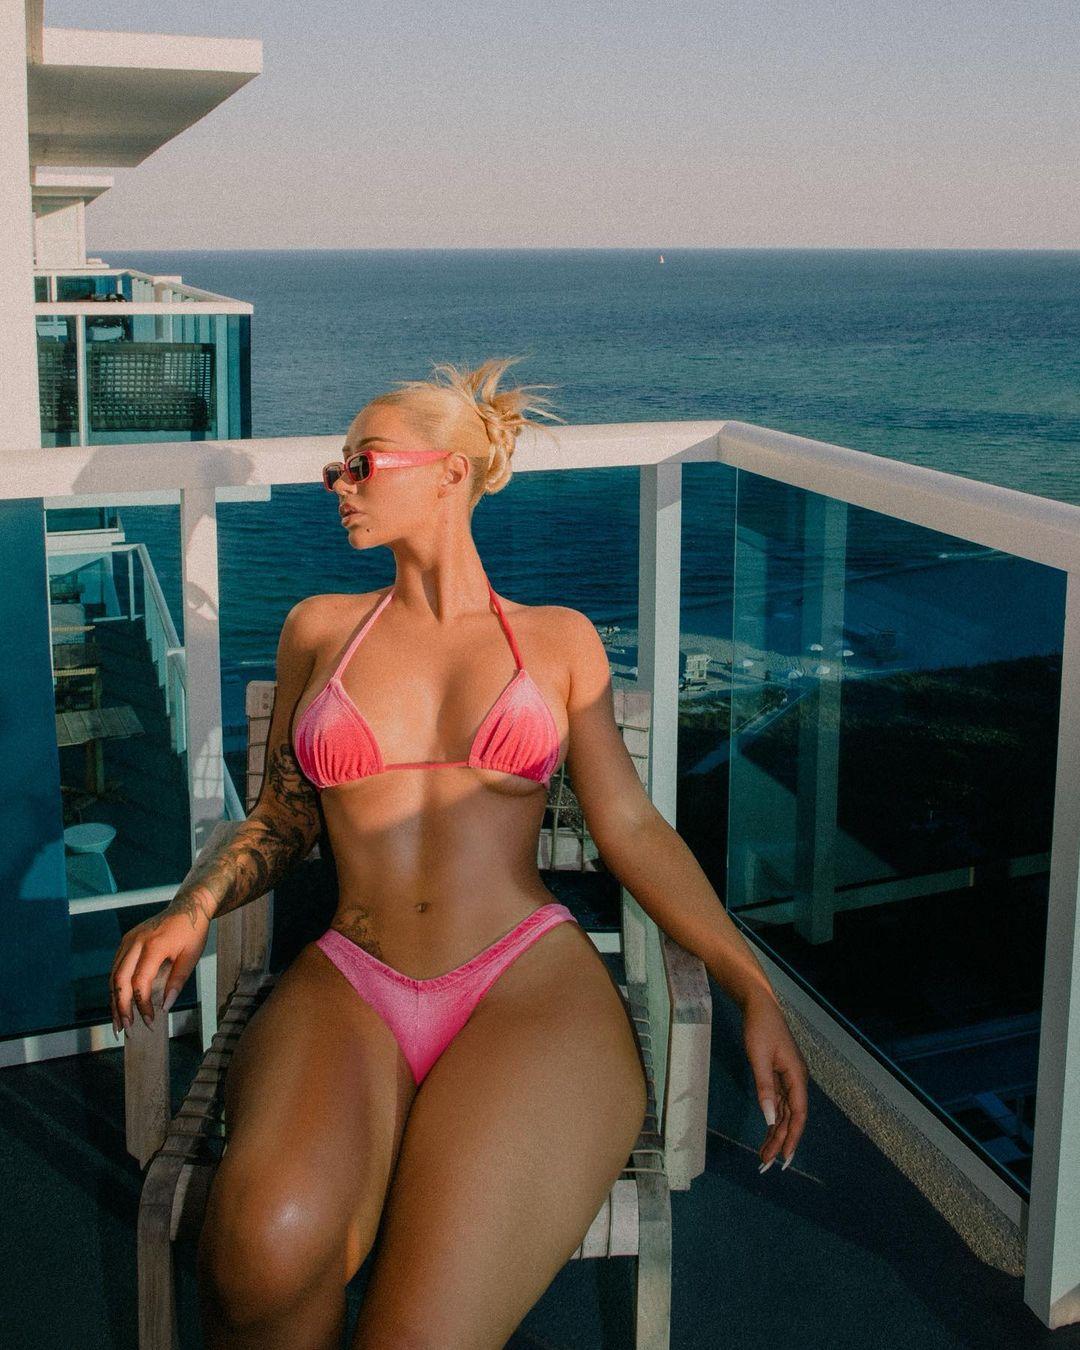 Iggy Azalea's Message Is 'Enjoy Your Bodies' As She Enters Recharge Mode